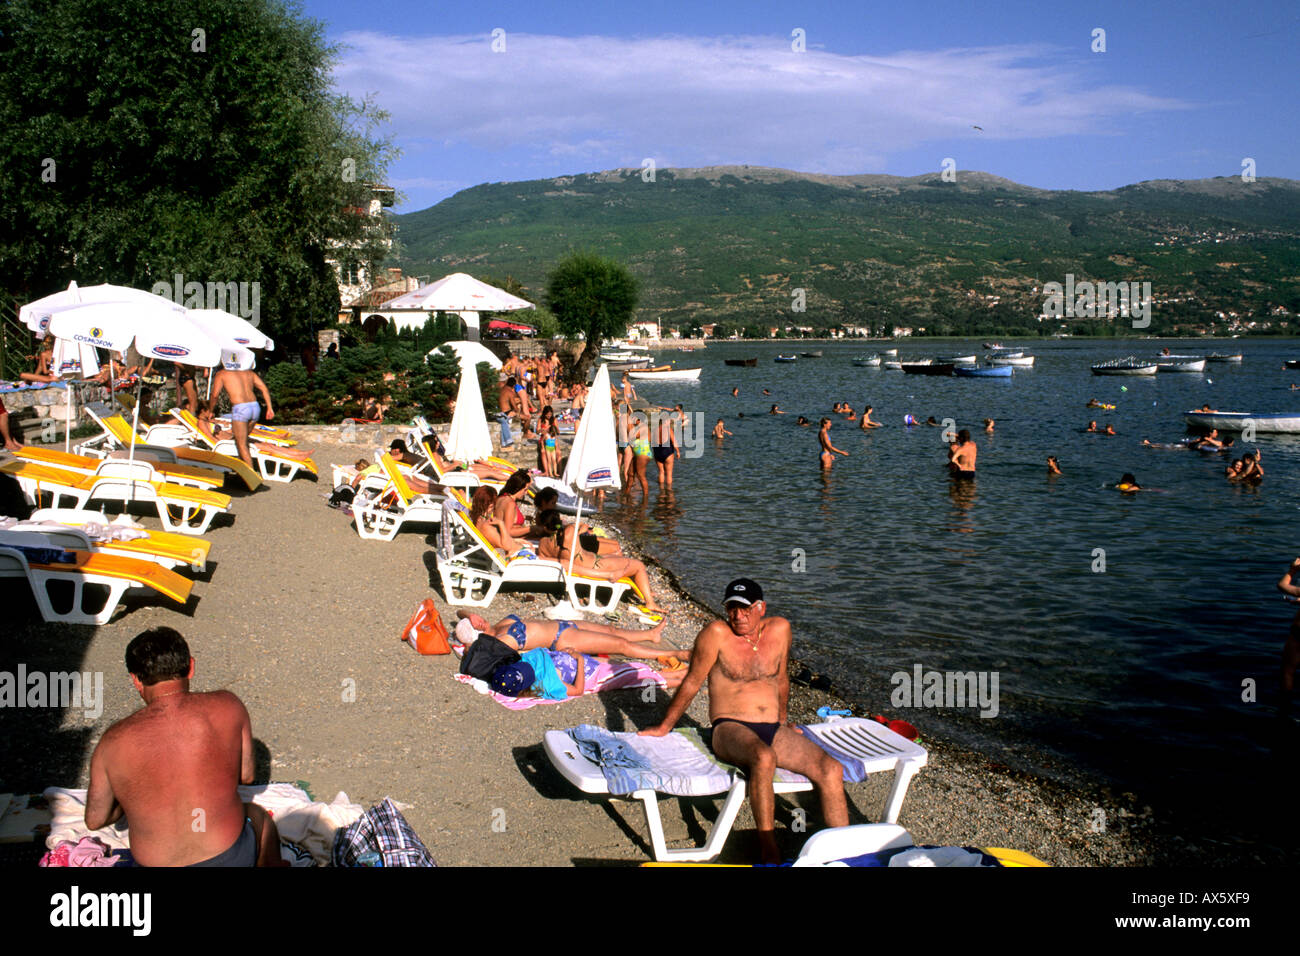 Beaches of holiday sunbathers on Lake Ohrid in Holiday town of ...